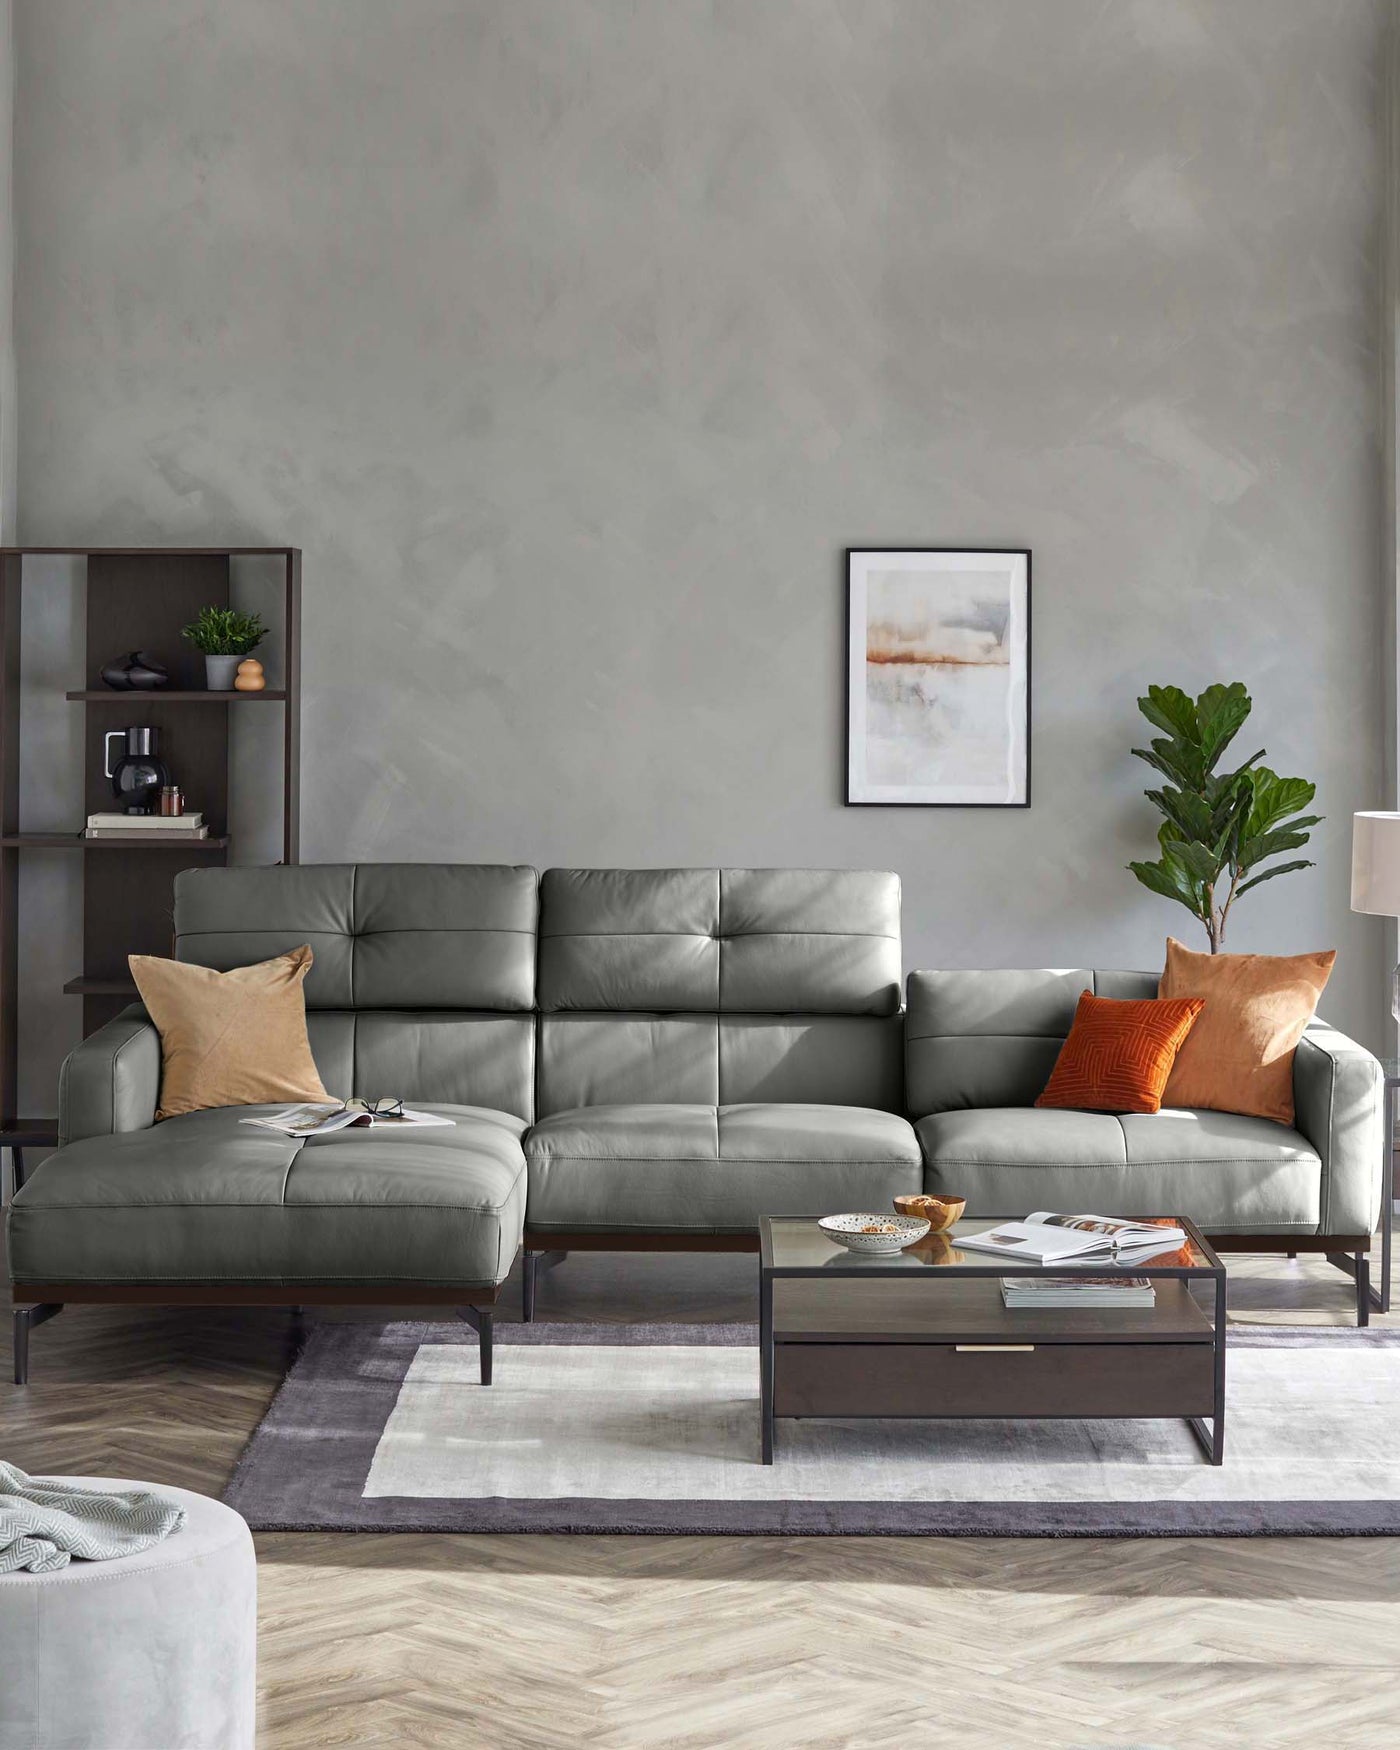 Modern living room featuring a sleek grey L-shaped sectional sofa adorned with beige and orange pillows, complemented by a rectangular wooden coffee table with a glass top. To the side stands a minimalist dark-wood shelving unit displaying decorative items. A framed abstract wall art adds an artistic touch above the couch, and a potted plant brings a splash of greenery to the space. The area is anchored by a two-tone area rug over a herringbone patterned floor.